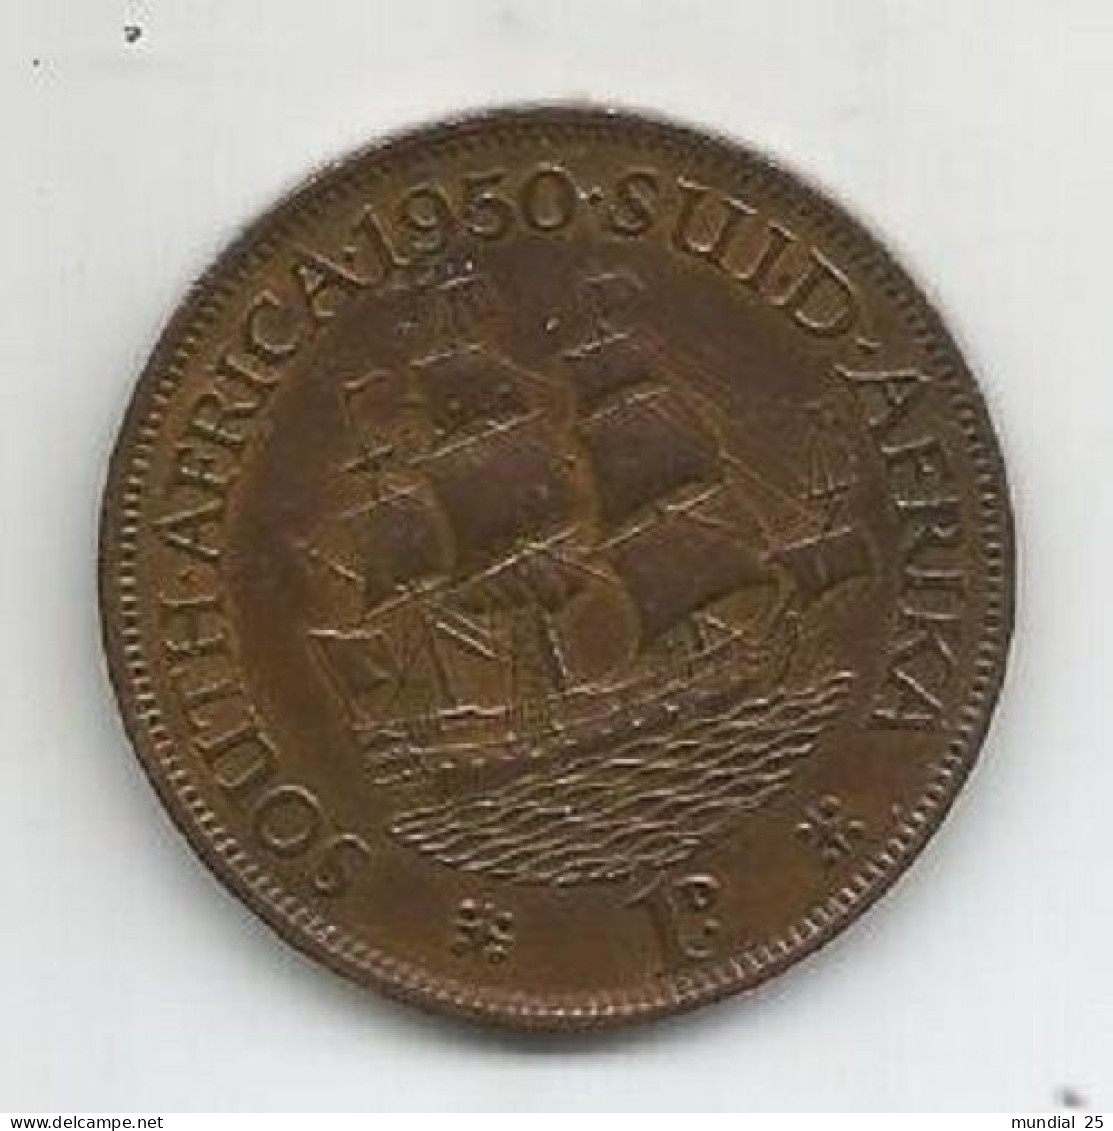 SOUTH AFRICA 1 PENNY 1950 - South Africa